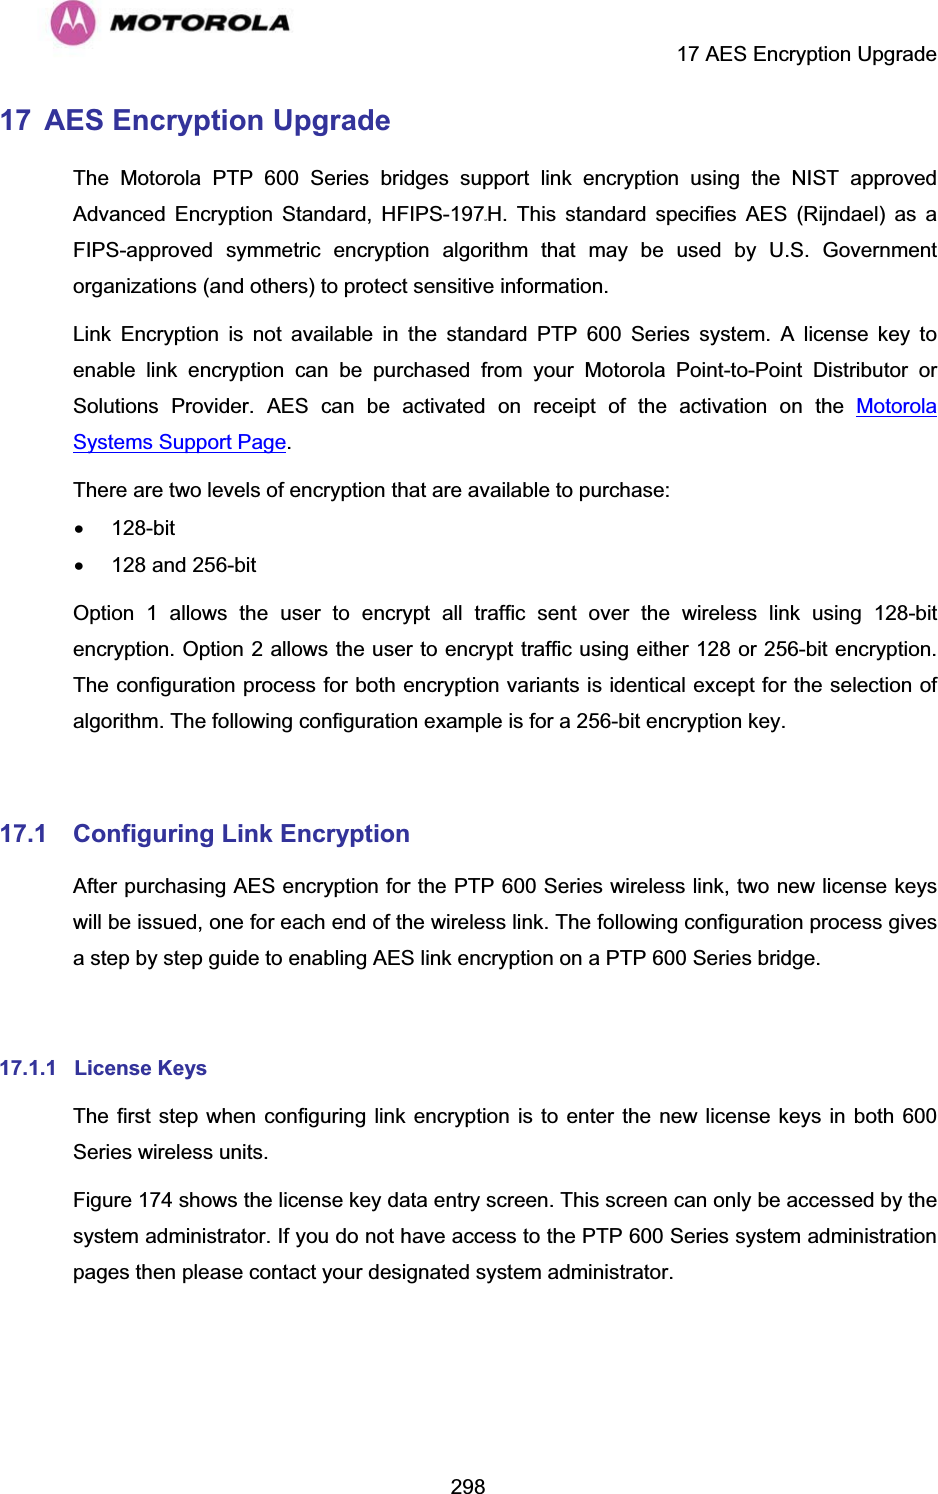     17 AES Encryption Upgrade  29817 AES Encryption Upgrade The Motorola PTP 600 Series bridges support link encryption using the NIST approved Advanced Encryption Standard, HFIPS-197UTH. This standard specifies AES (Rijndael) as a FIPS-approved symmetric encryption algorithm that may be used by U.S. Government organizations (and others) to protect sensitive information. Link Encryption is not available in the standard PTP 600 Series system. A license key to enable link encryption can be purchased from your Motorola Point-to-Point Distributor or Solutions Provider. AES can be activated on receipt of the activation on the Motorola Systems Support Page. There are two levels of encryption that are available to purchase: x 128-bit x  128 and 256-bit Option 1 allows the user to encrypt all traffic sent over the wireless link using 128-bit encryption. Option 2 allows the user to encrypt traffic using either 128 or 256-bit encryption. The configuration process for both encryption variants is identical except for the selection of algorithm. The following configuration example is for a 256-bit encryption key.  17.1 Configuring Link Encryption After purchasing AES encryption for the PTP 600 Series wireless link, two new license keys will be issued, one for each end of the wireless link. The following configuration process gives a step by step guide to enabling AES link encryption on a PTP 600 Series bridge.  17.1.1 License Keys The first step when configuring link encryption is to enter the new license keys in both 600 Series wireless units. Figure 174 shows the license key data entry screen. This screen can only be accessed by the system administrator. If you do not have access to the PTP 600 Series system administration pages then please contact your designated system administrator.  